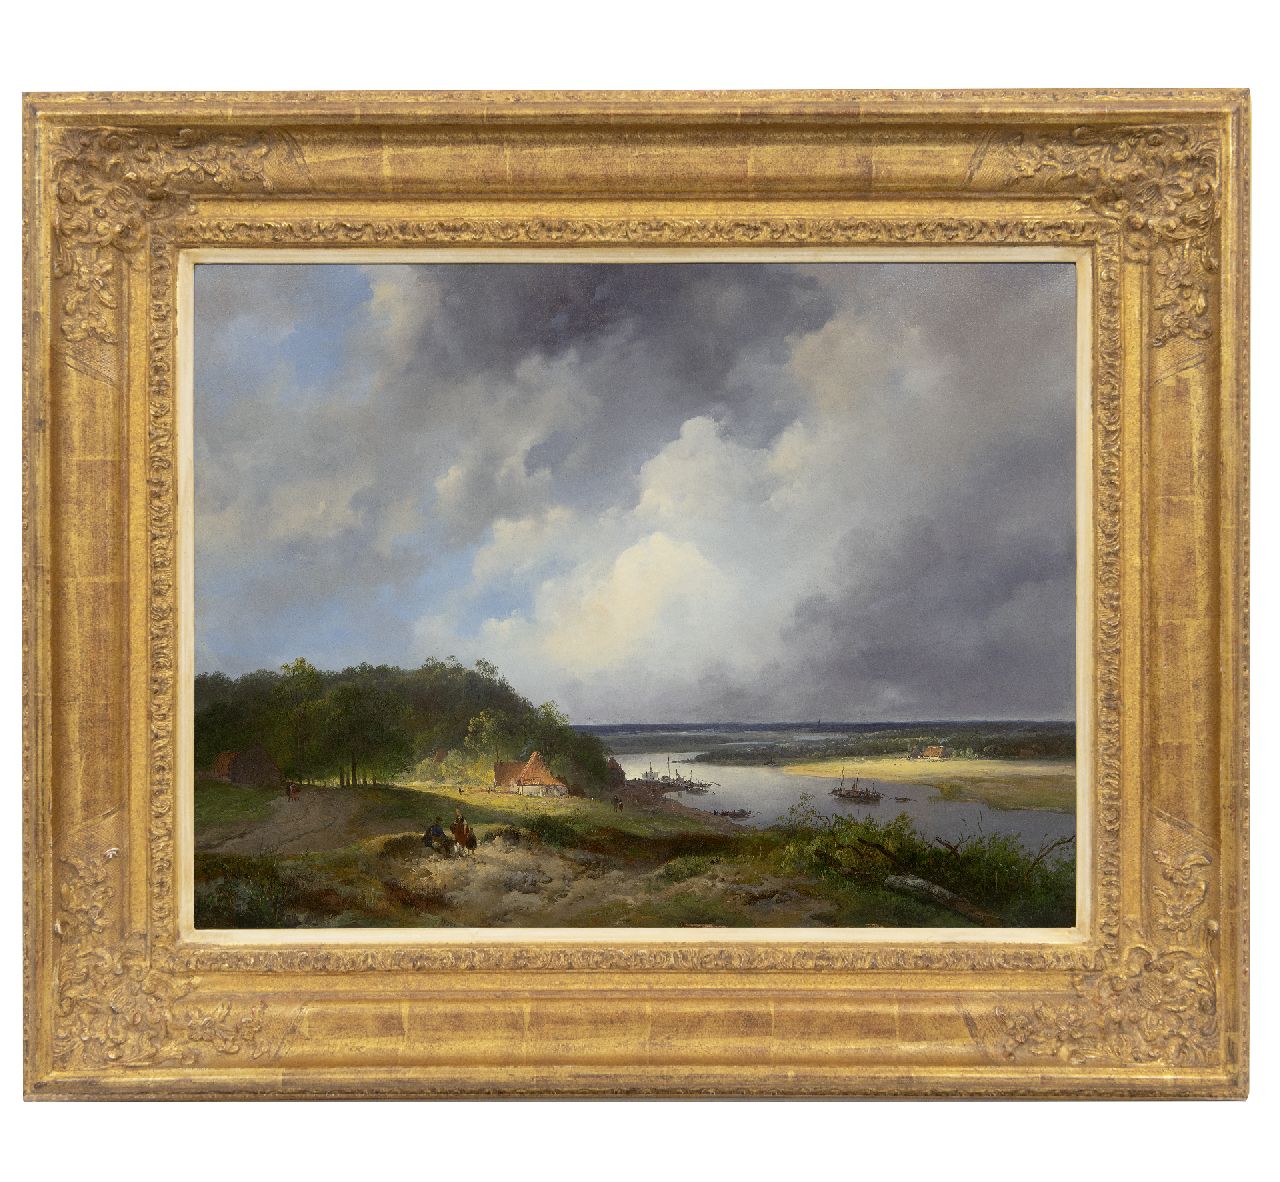 Nuijen W.J.J.  | Wijnandus Johannes Josephus 'Wijnand' Nuijen | Paintings offered for sale | An extensive river landscape, possible the river Rhine, oil on panel 41.9 x 55.3 cm, signed l.c. (indistinctly) and dated 1831